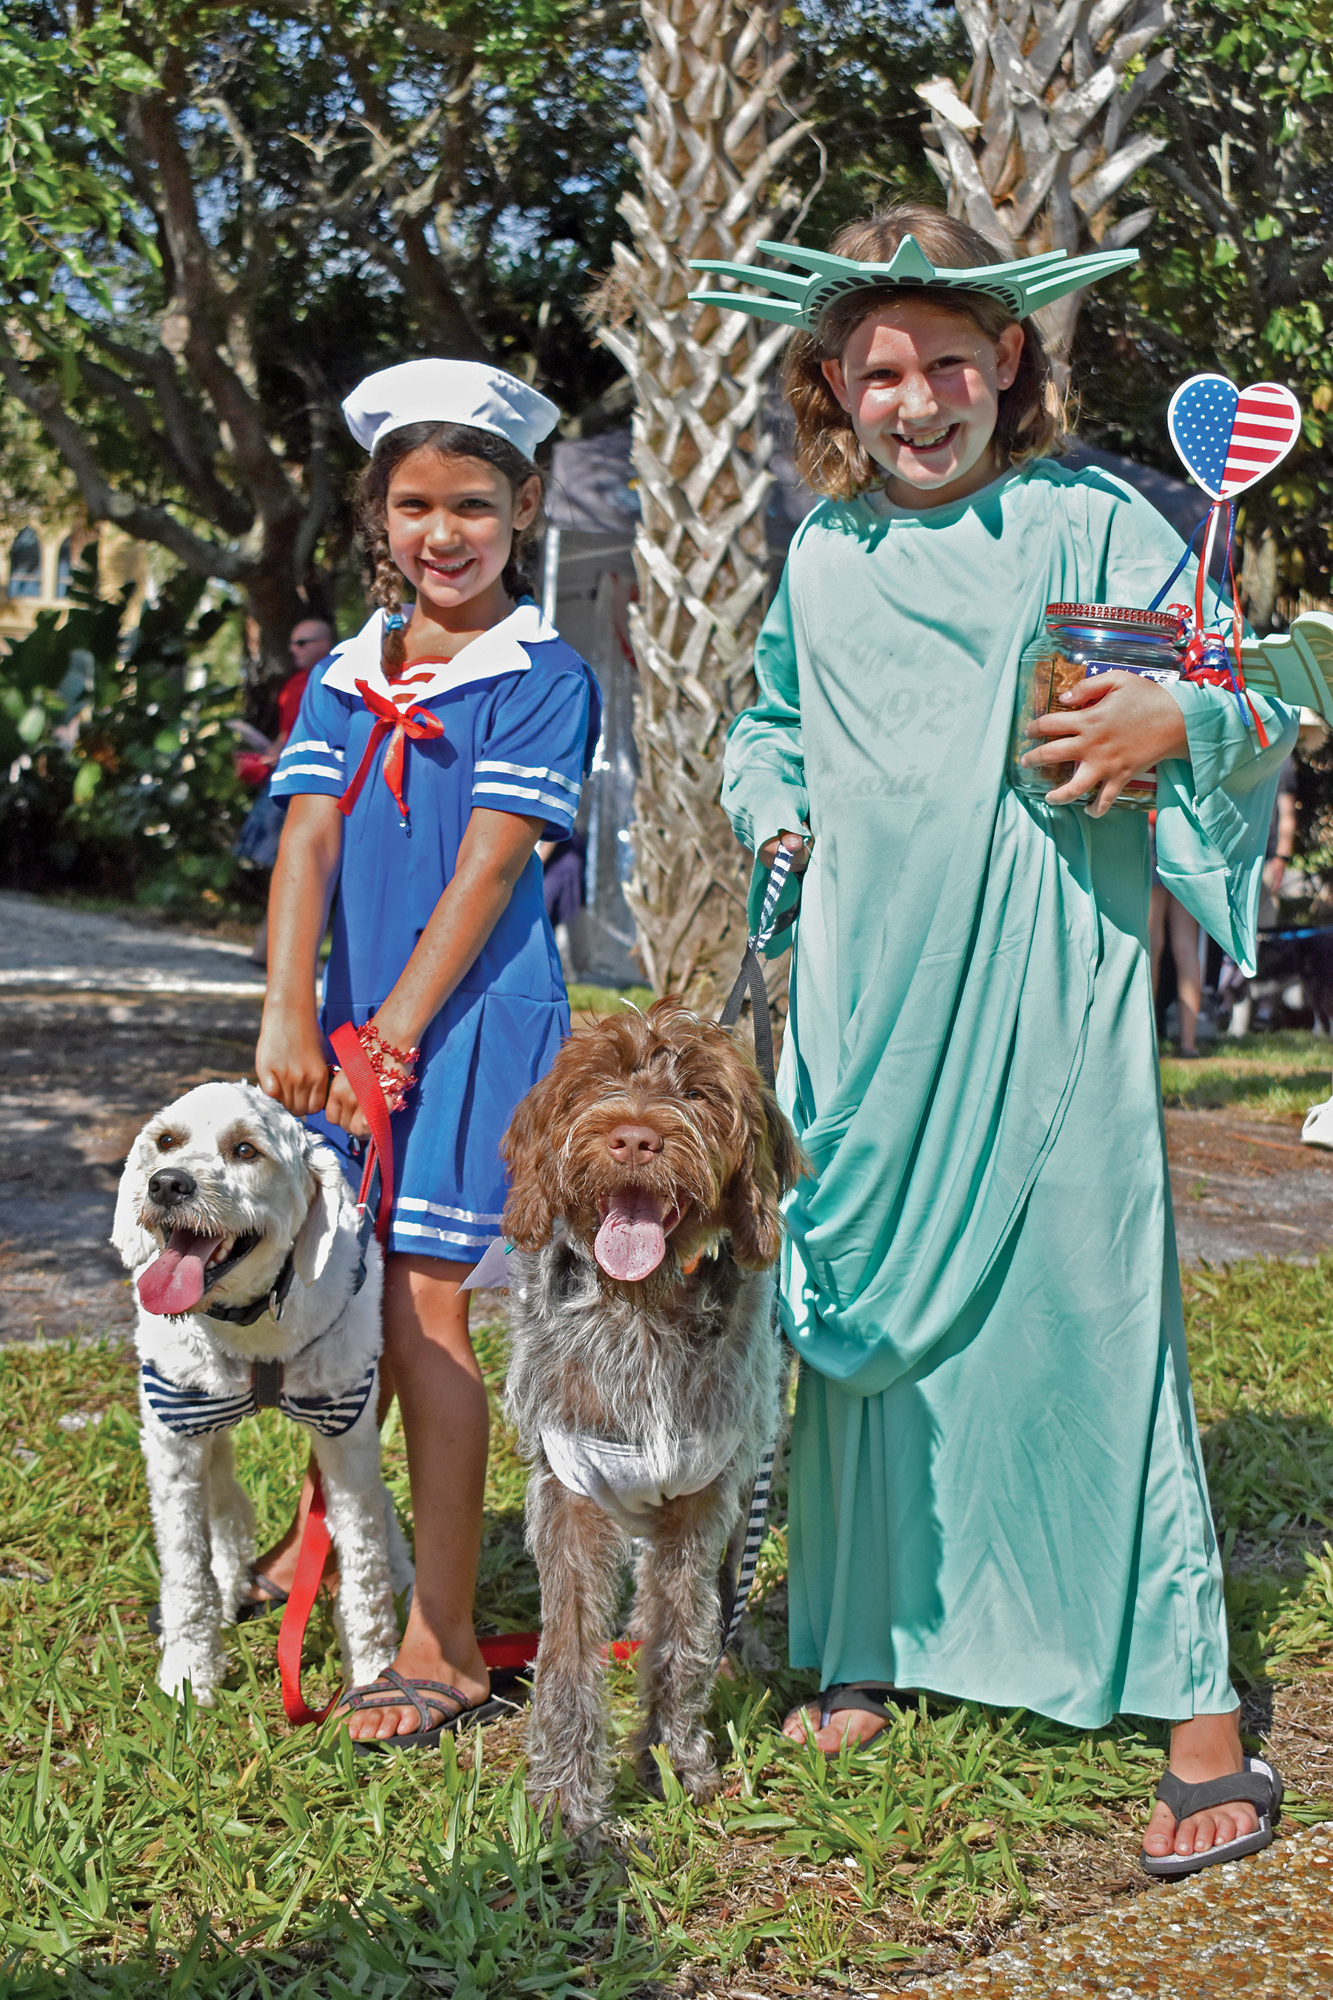 Lilly and Grace Gerling won “Most Patriotic” in the Hot Diggity Dog Contest with their dogs Sailor and Davy Jones.